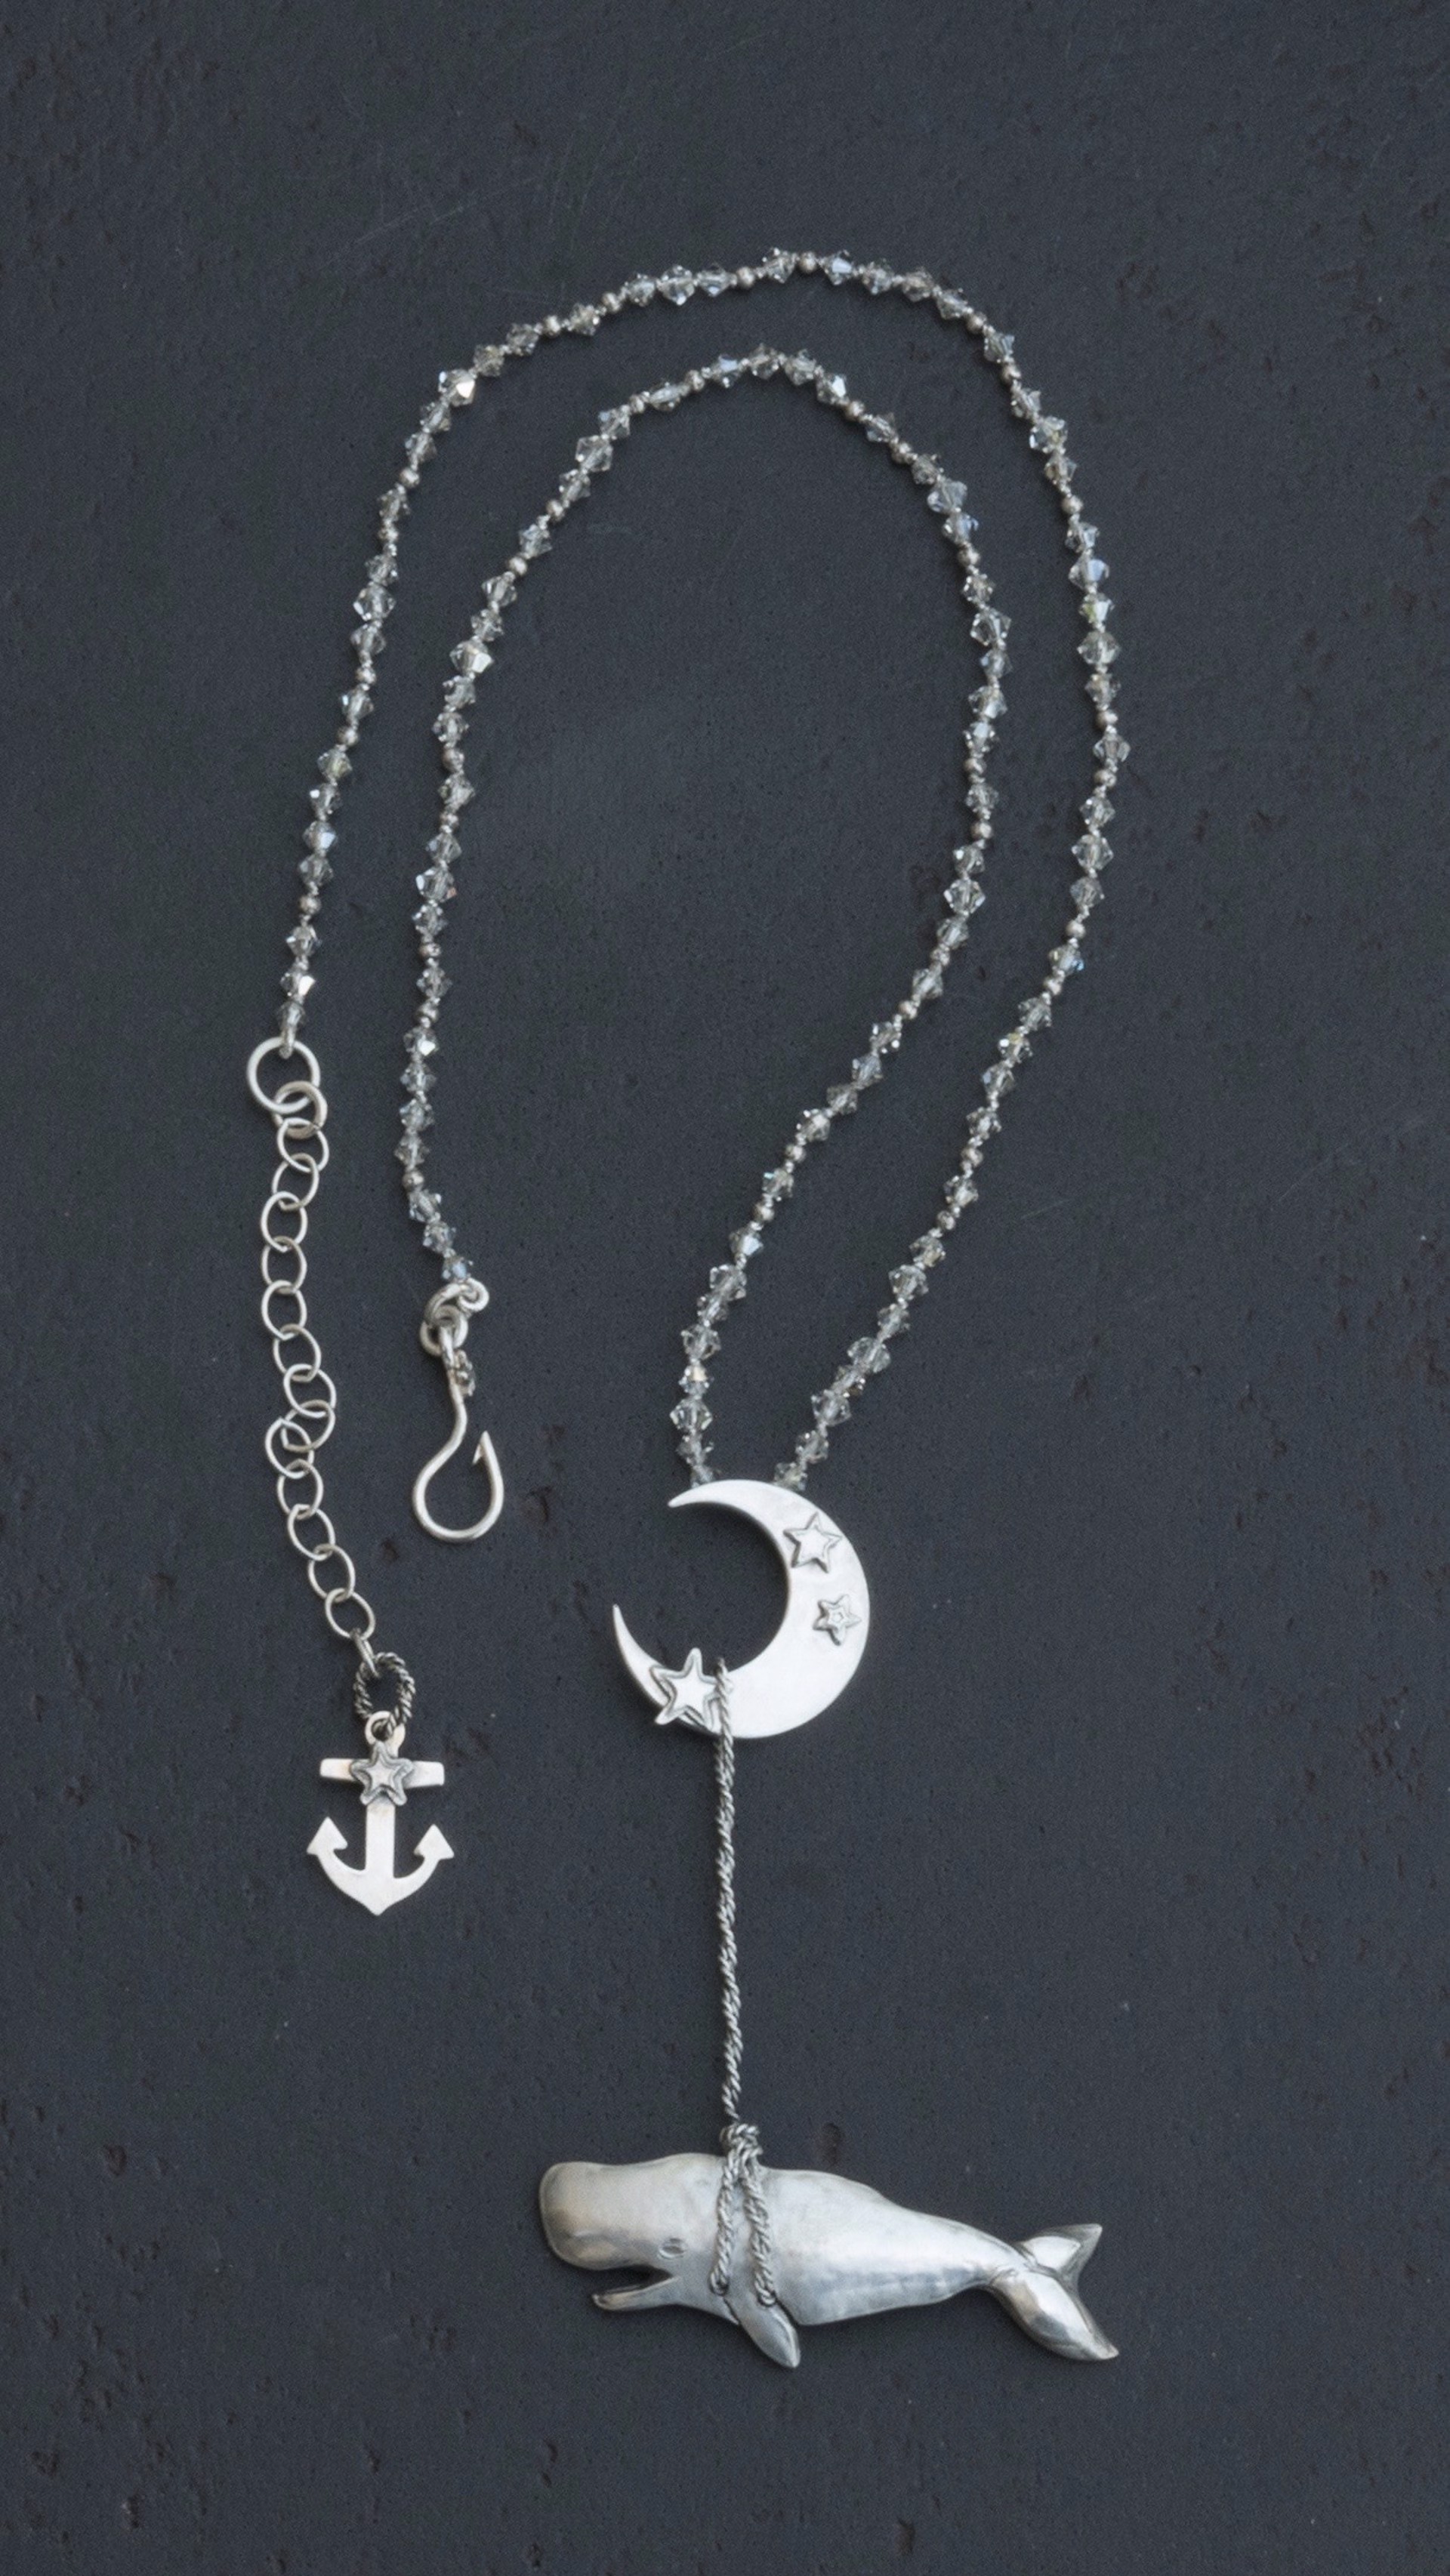 Use the Moon (Necklace and earring set) by Beth Lonsinger